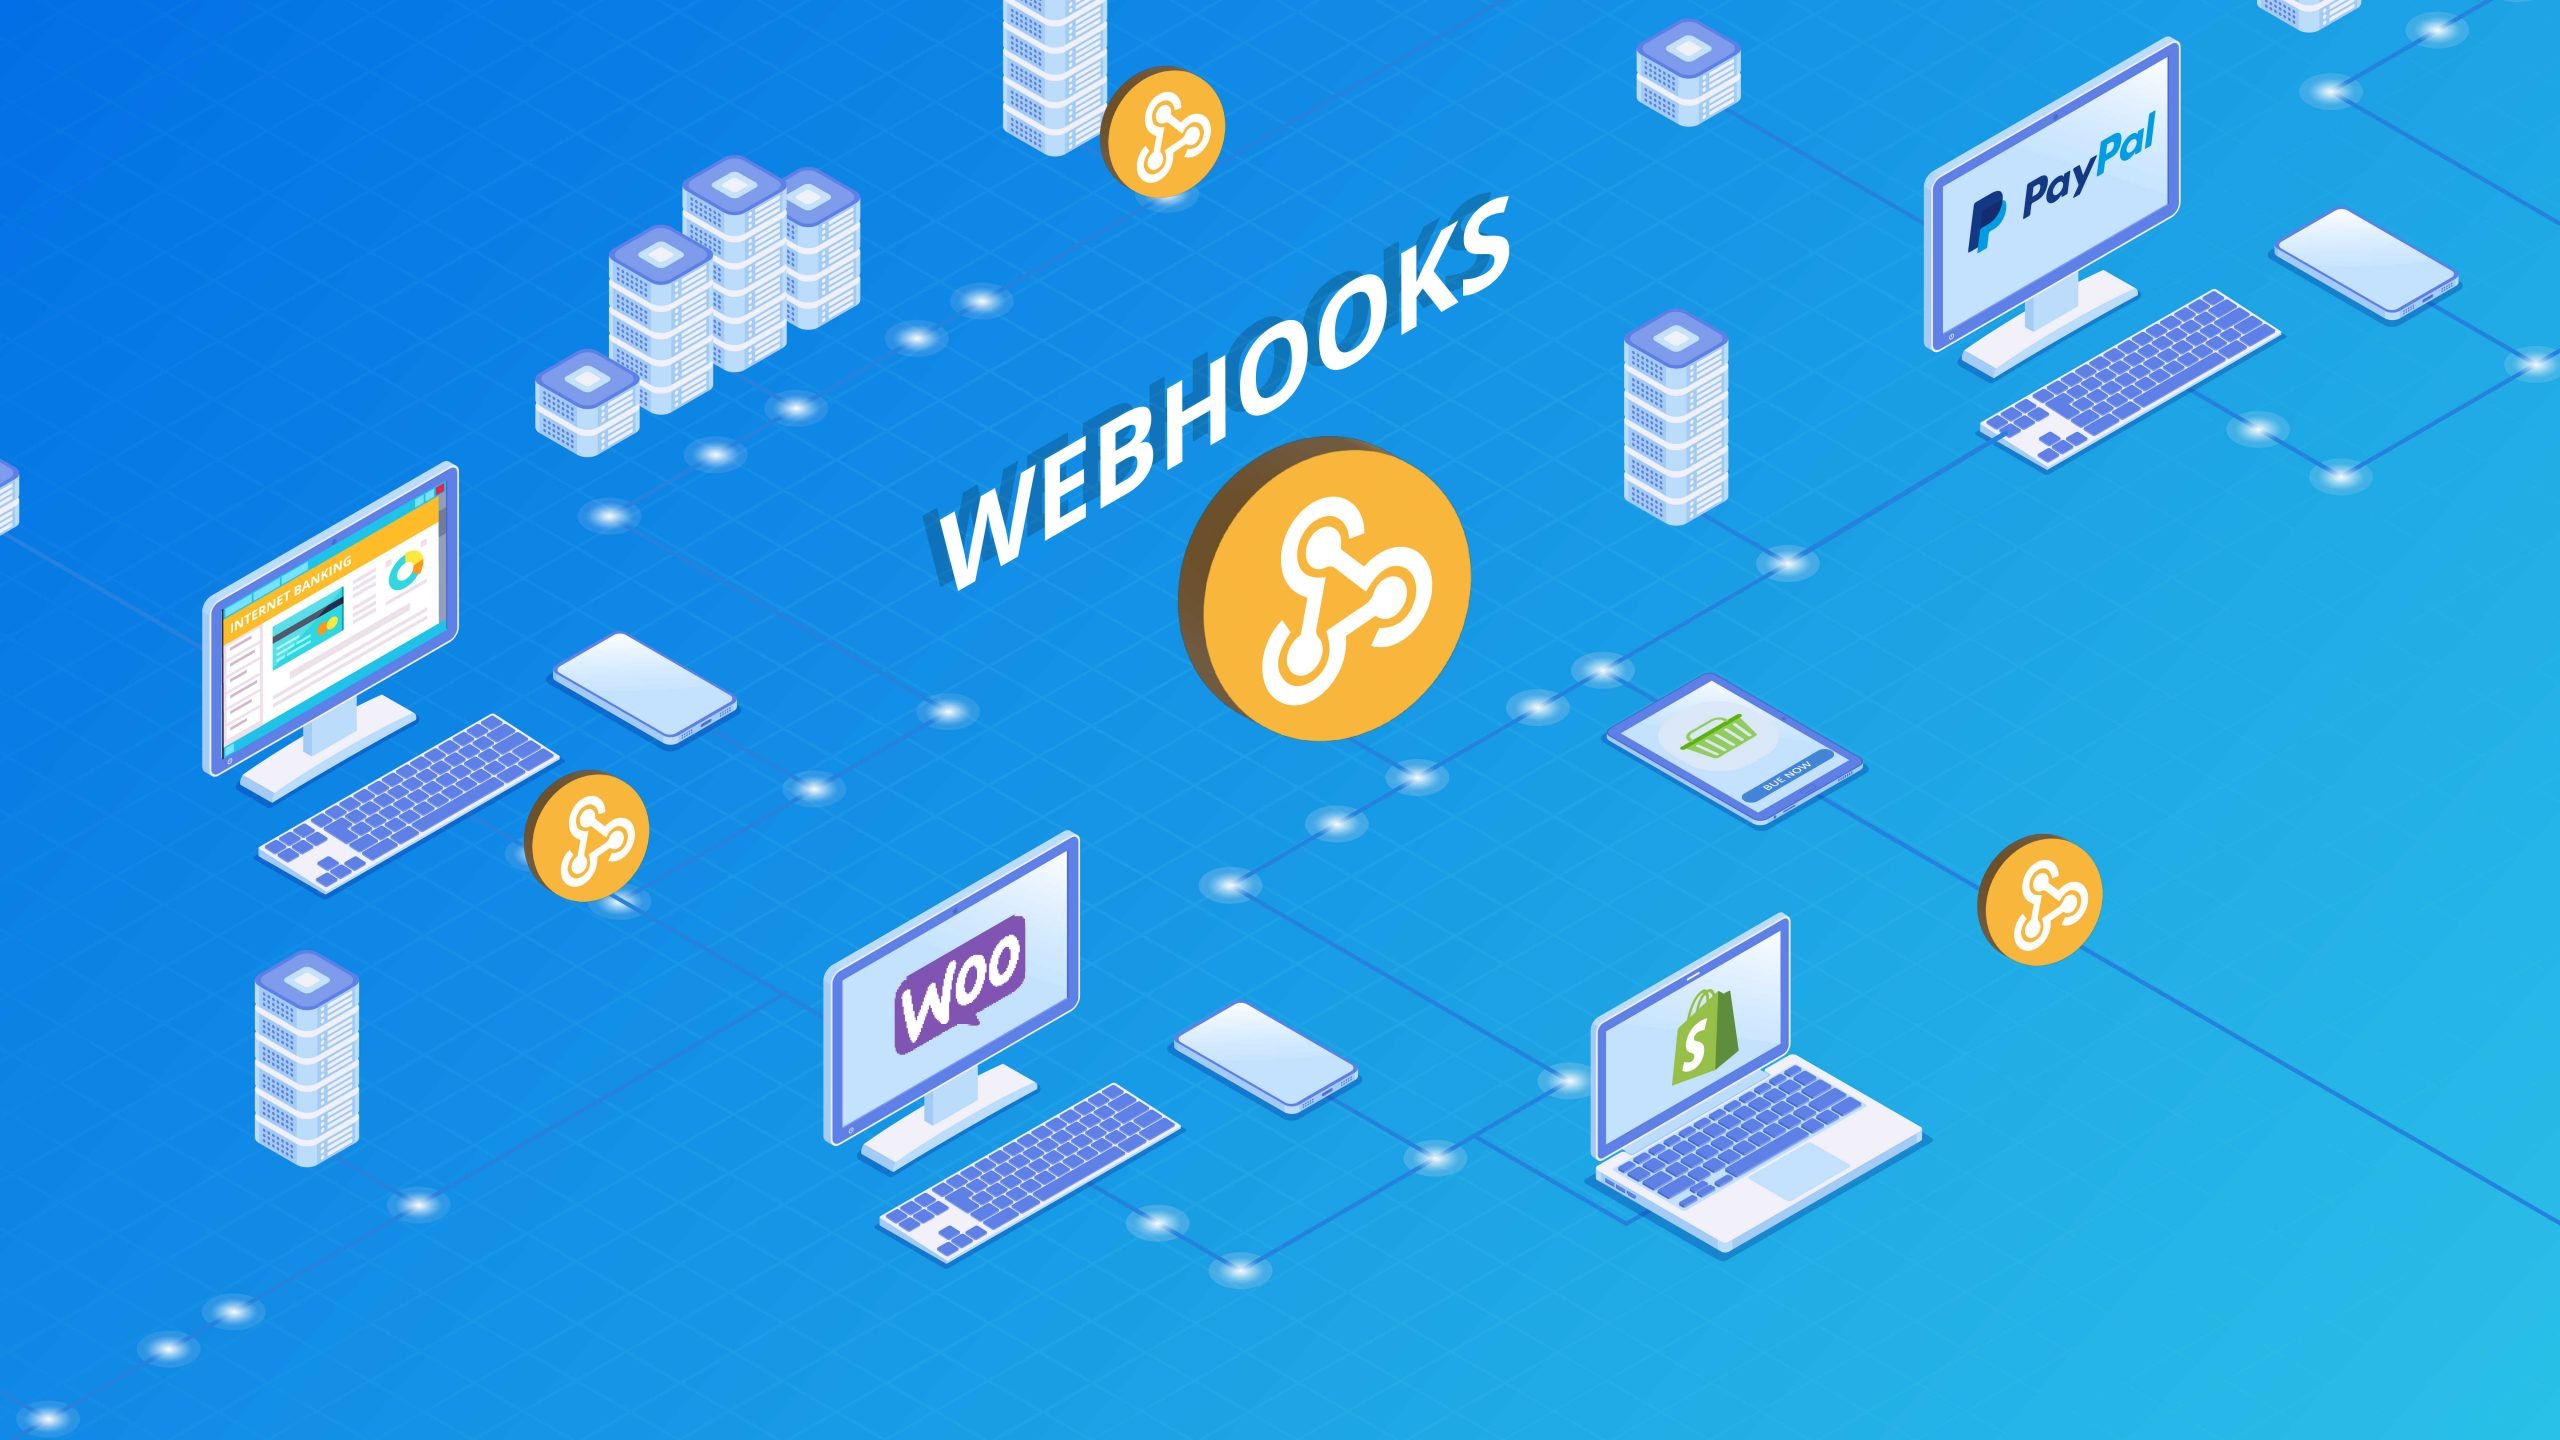 What is Webhook?